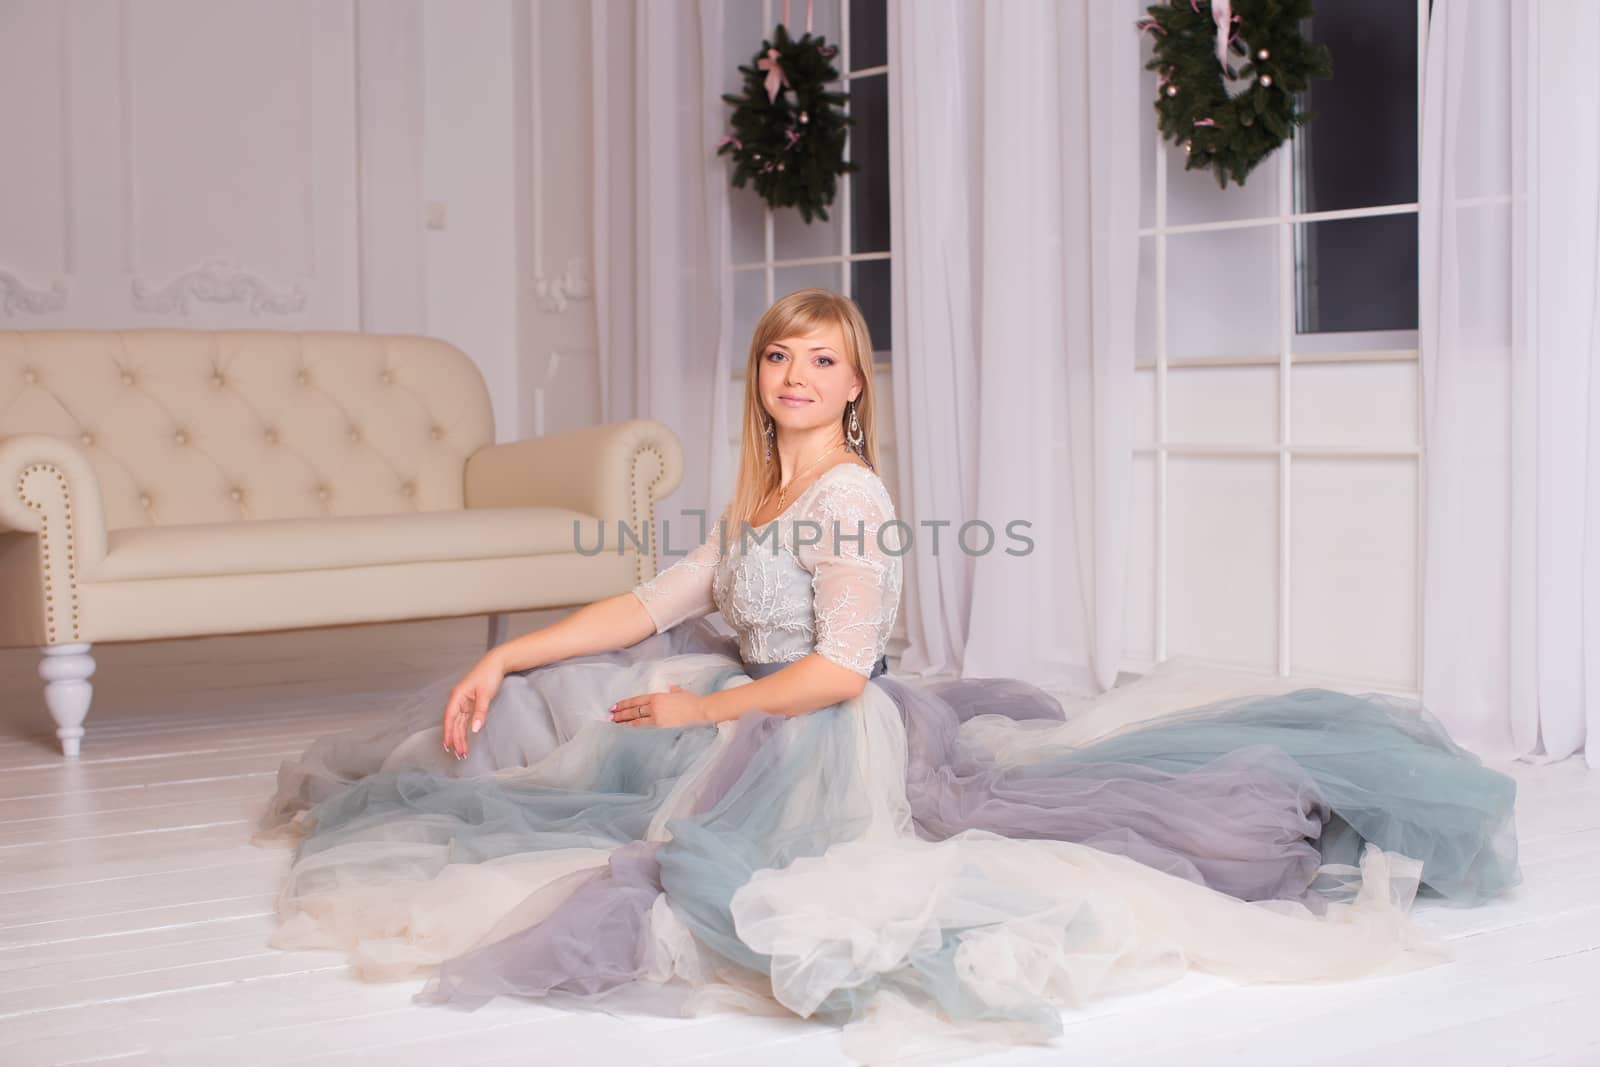 Attractive young girl sitting on the floor, dressed in a white gown with a train dinnym